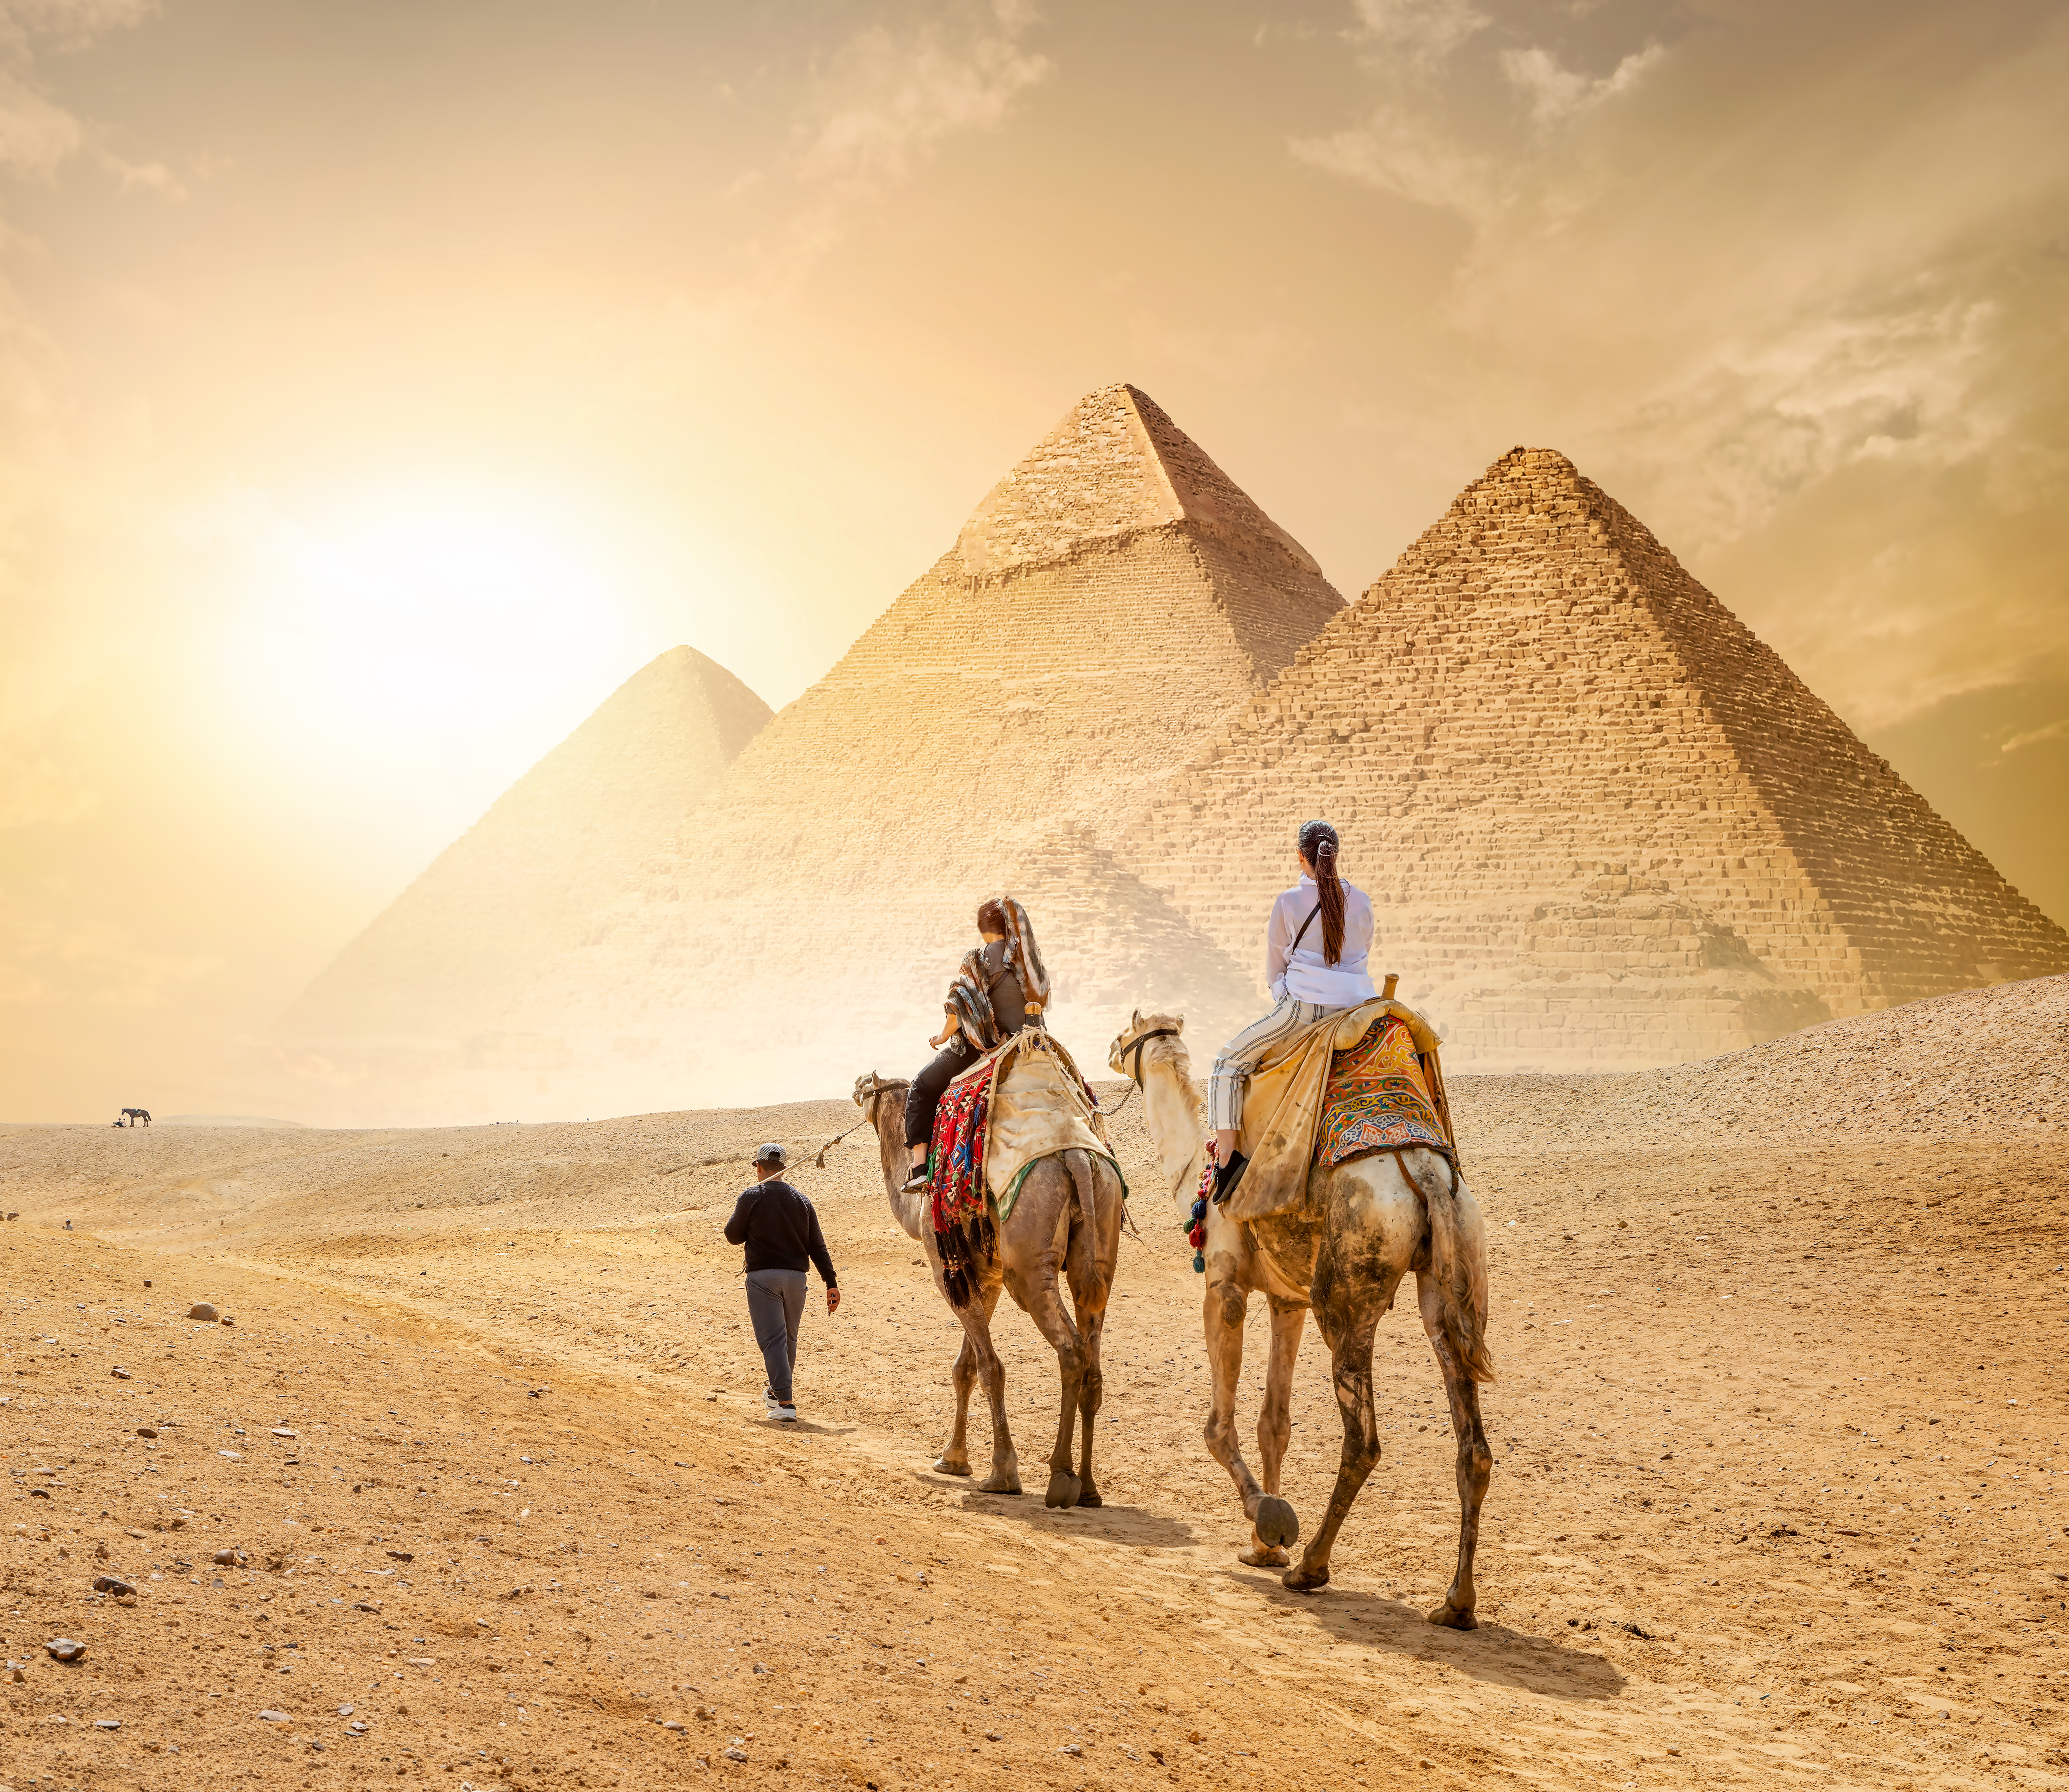 Where to Travel Based on Your Zodiac Sign - Pyramids in Egypt